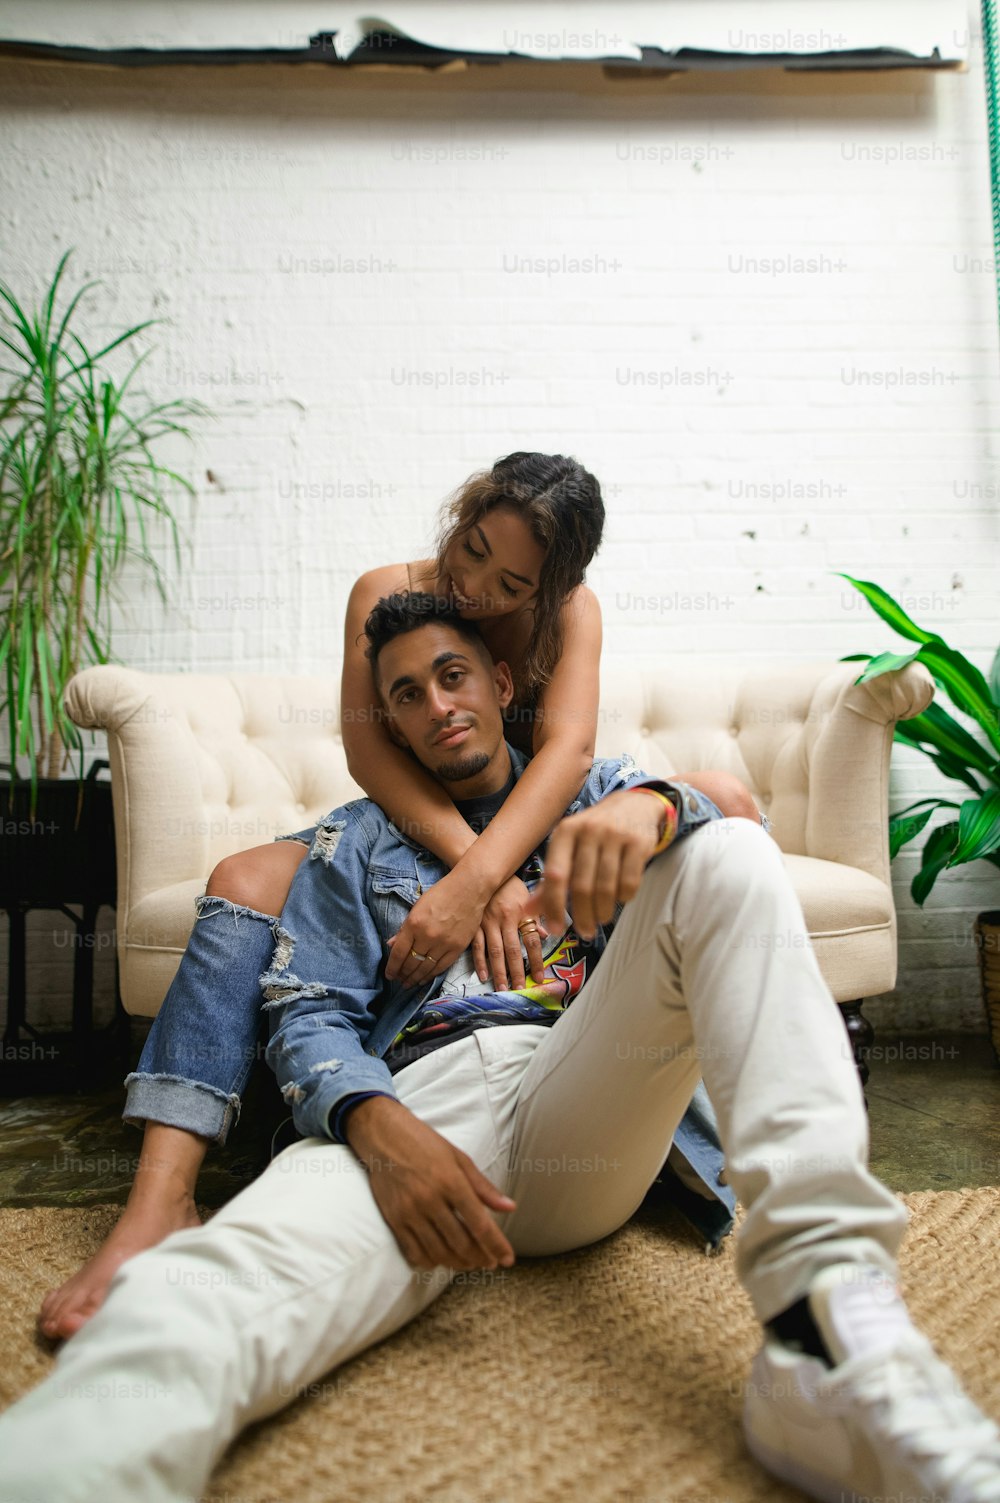 a man sitting on the floor holding a woman